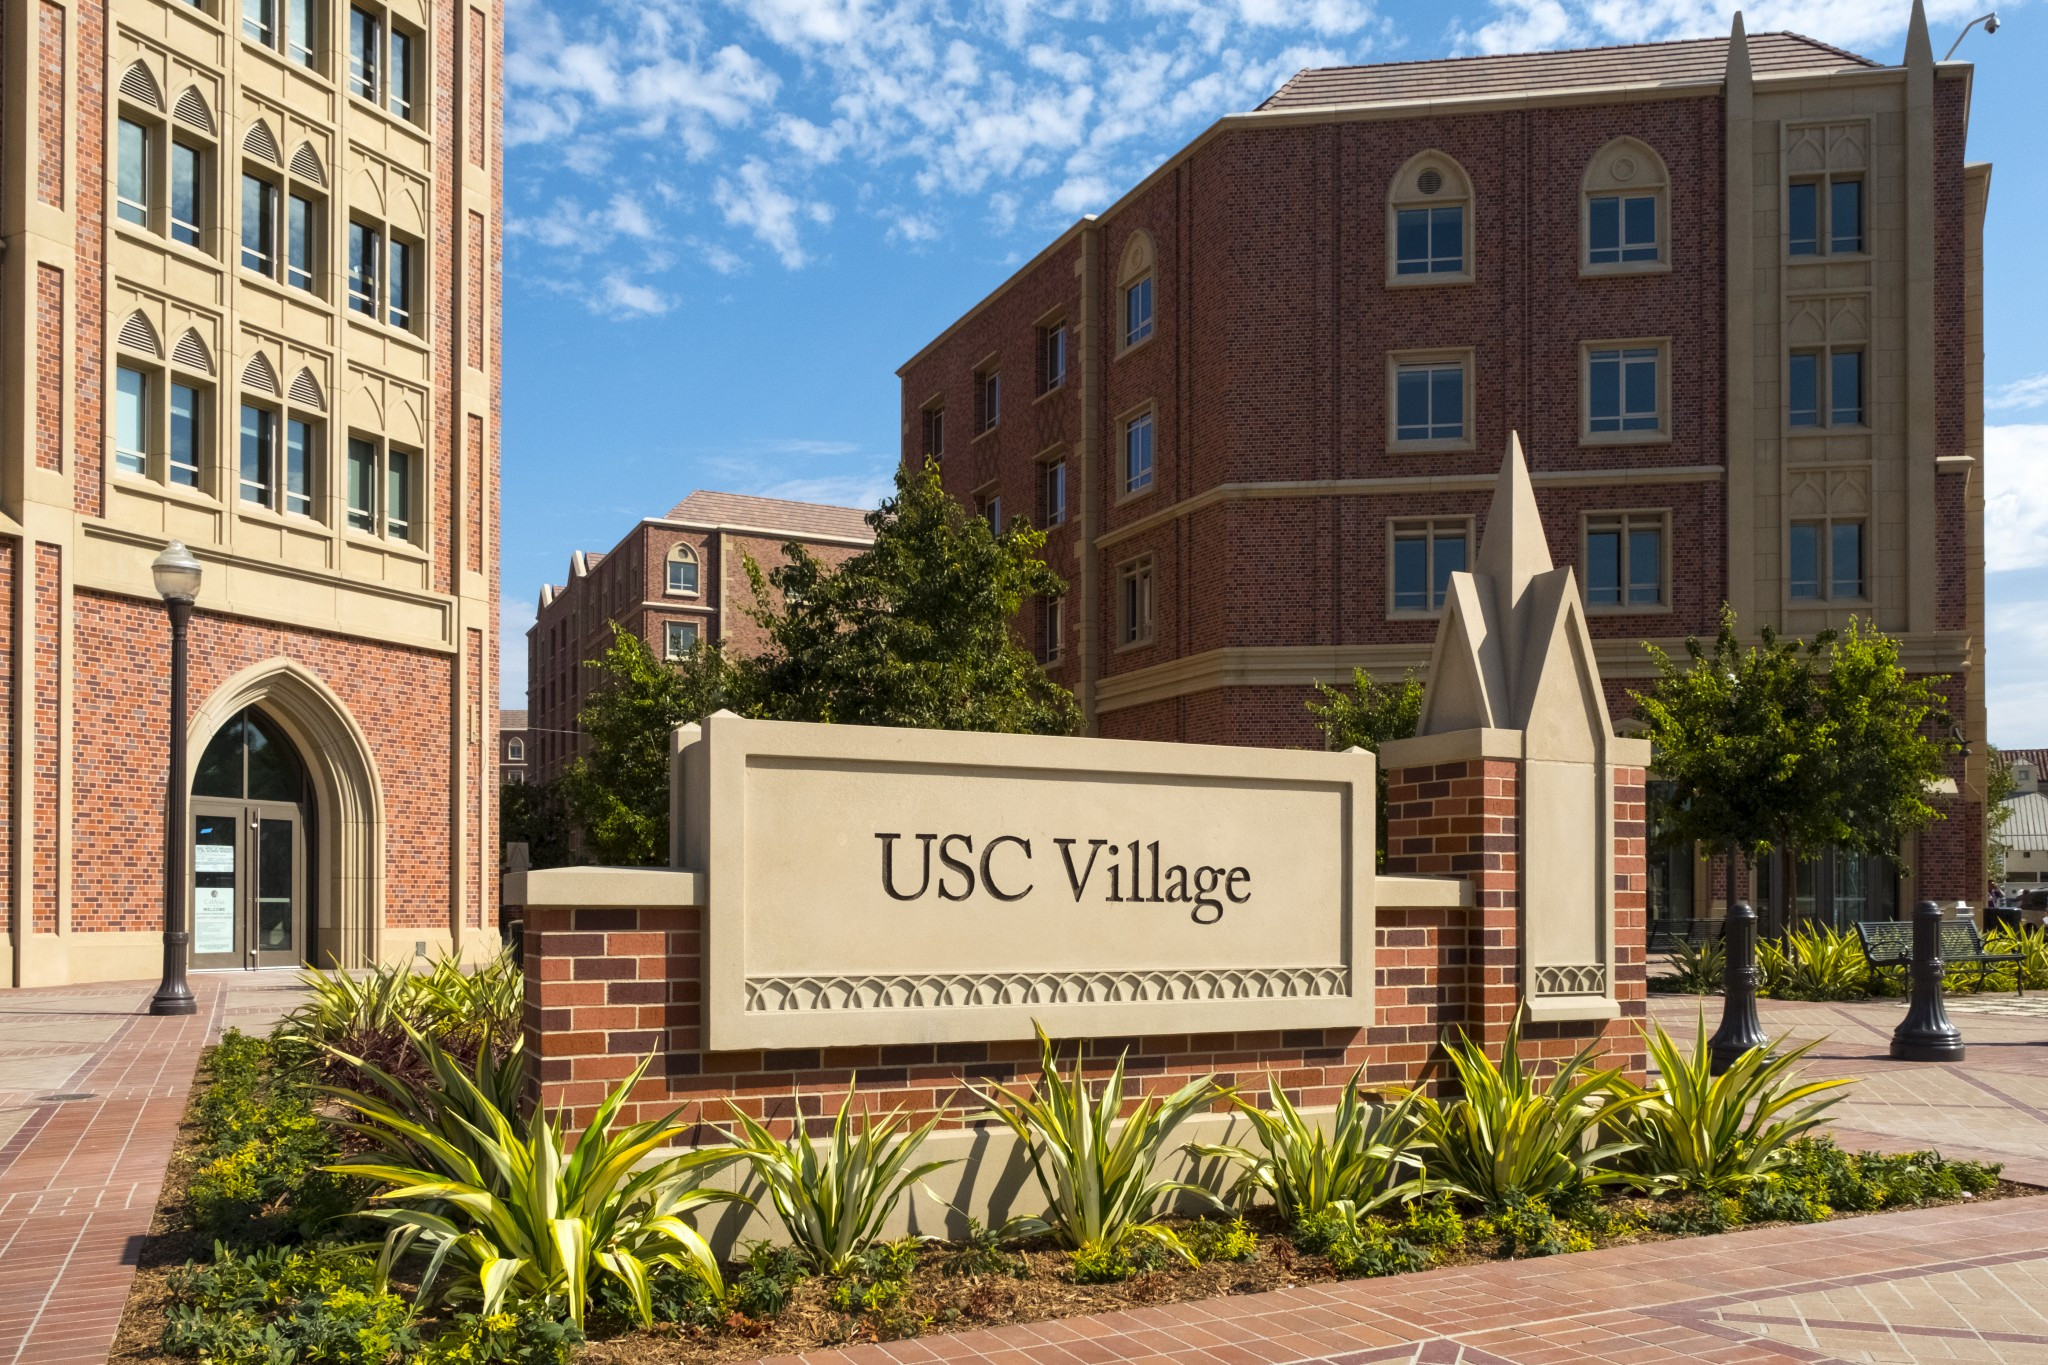 USC Village will act as the media hub during Los Angeles 2028 ©Los Angeles 2028